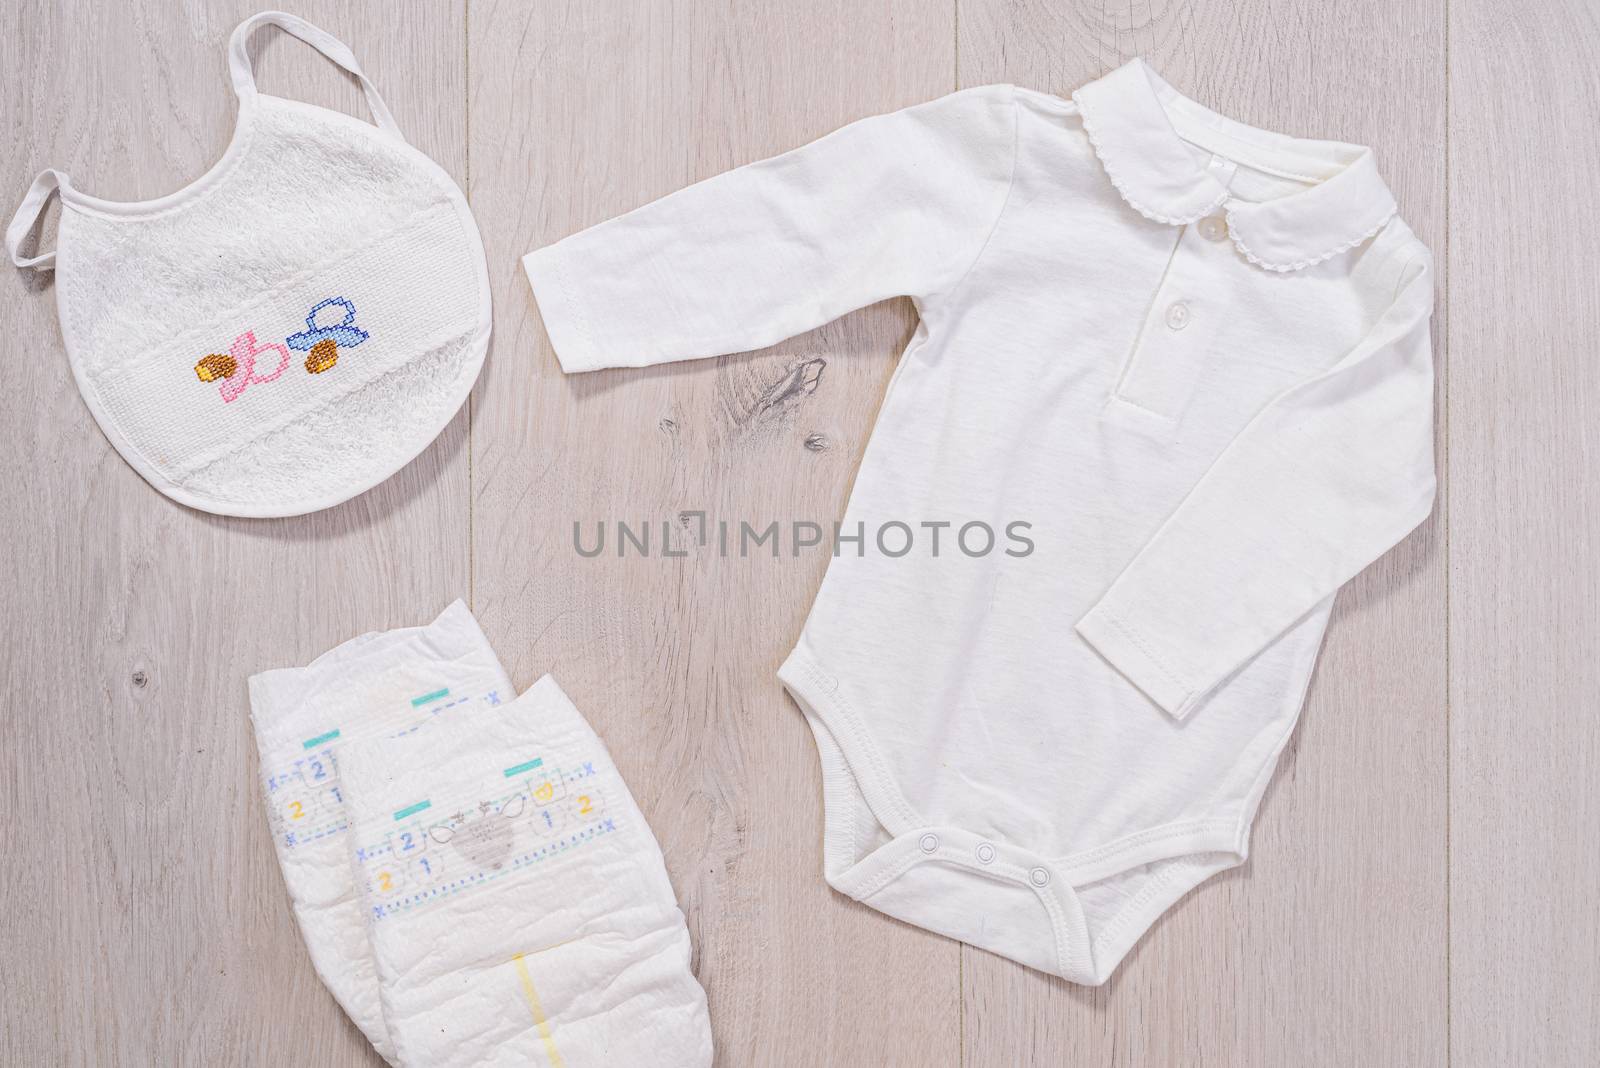 White baby clothes, diapers and baby bib. newborn by jcdiazhidalgo